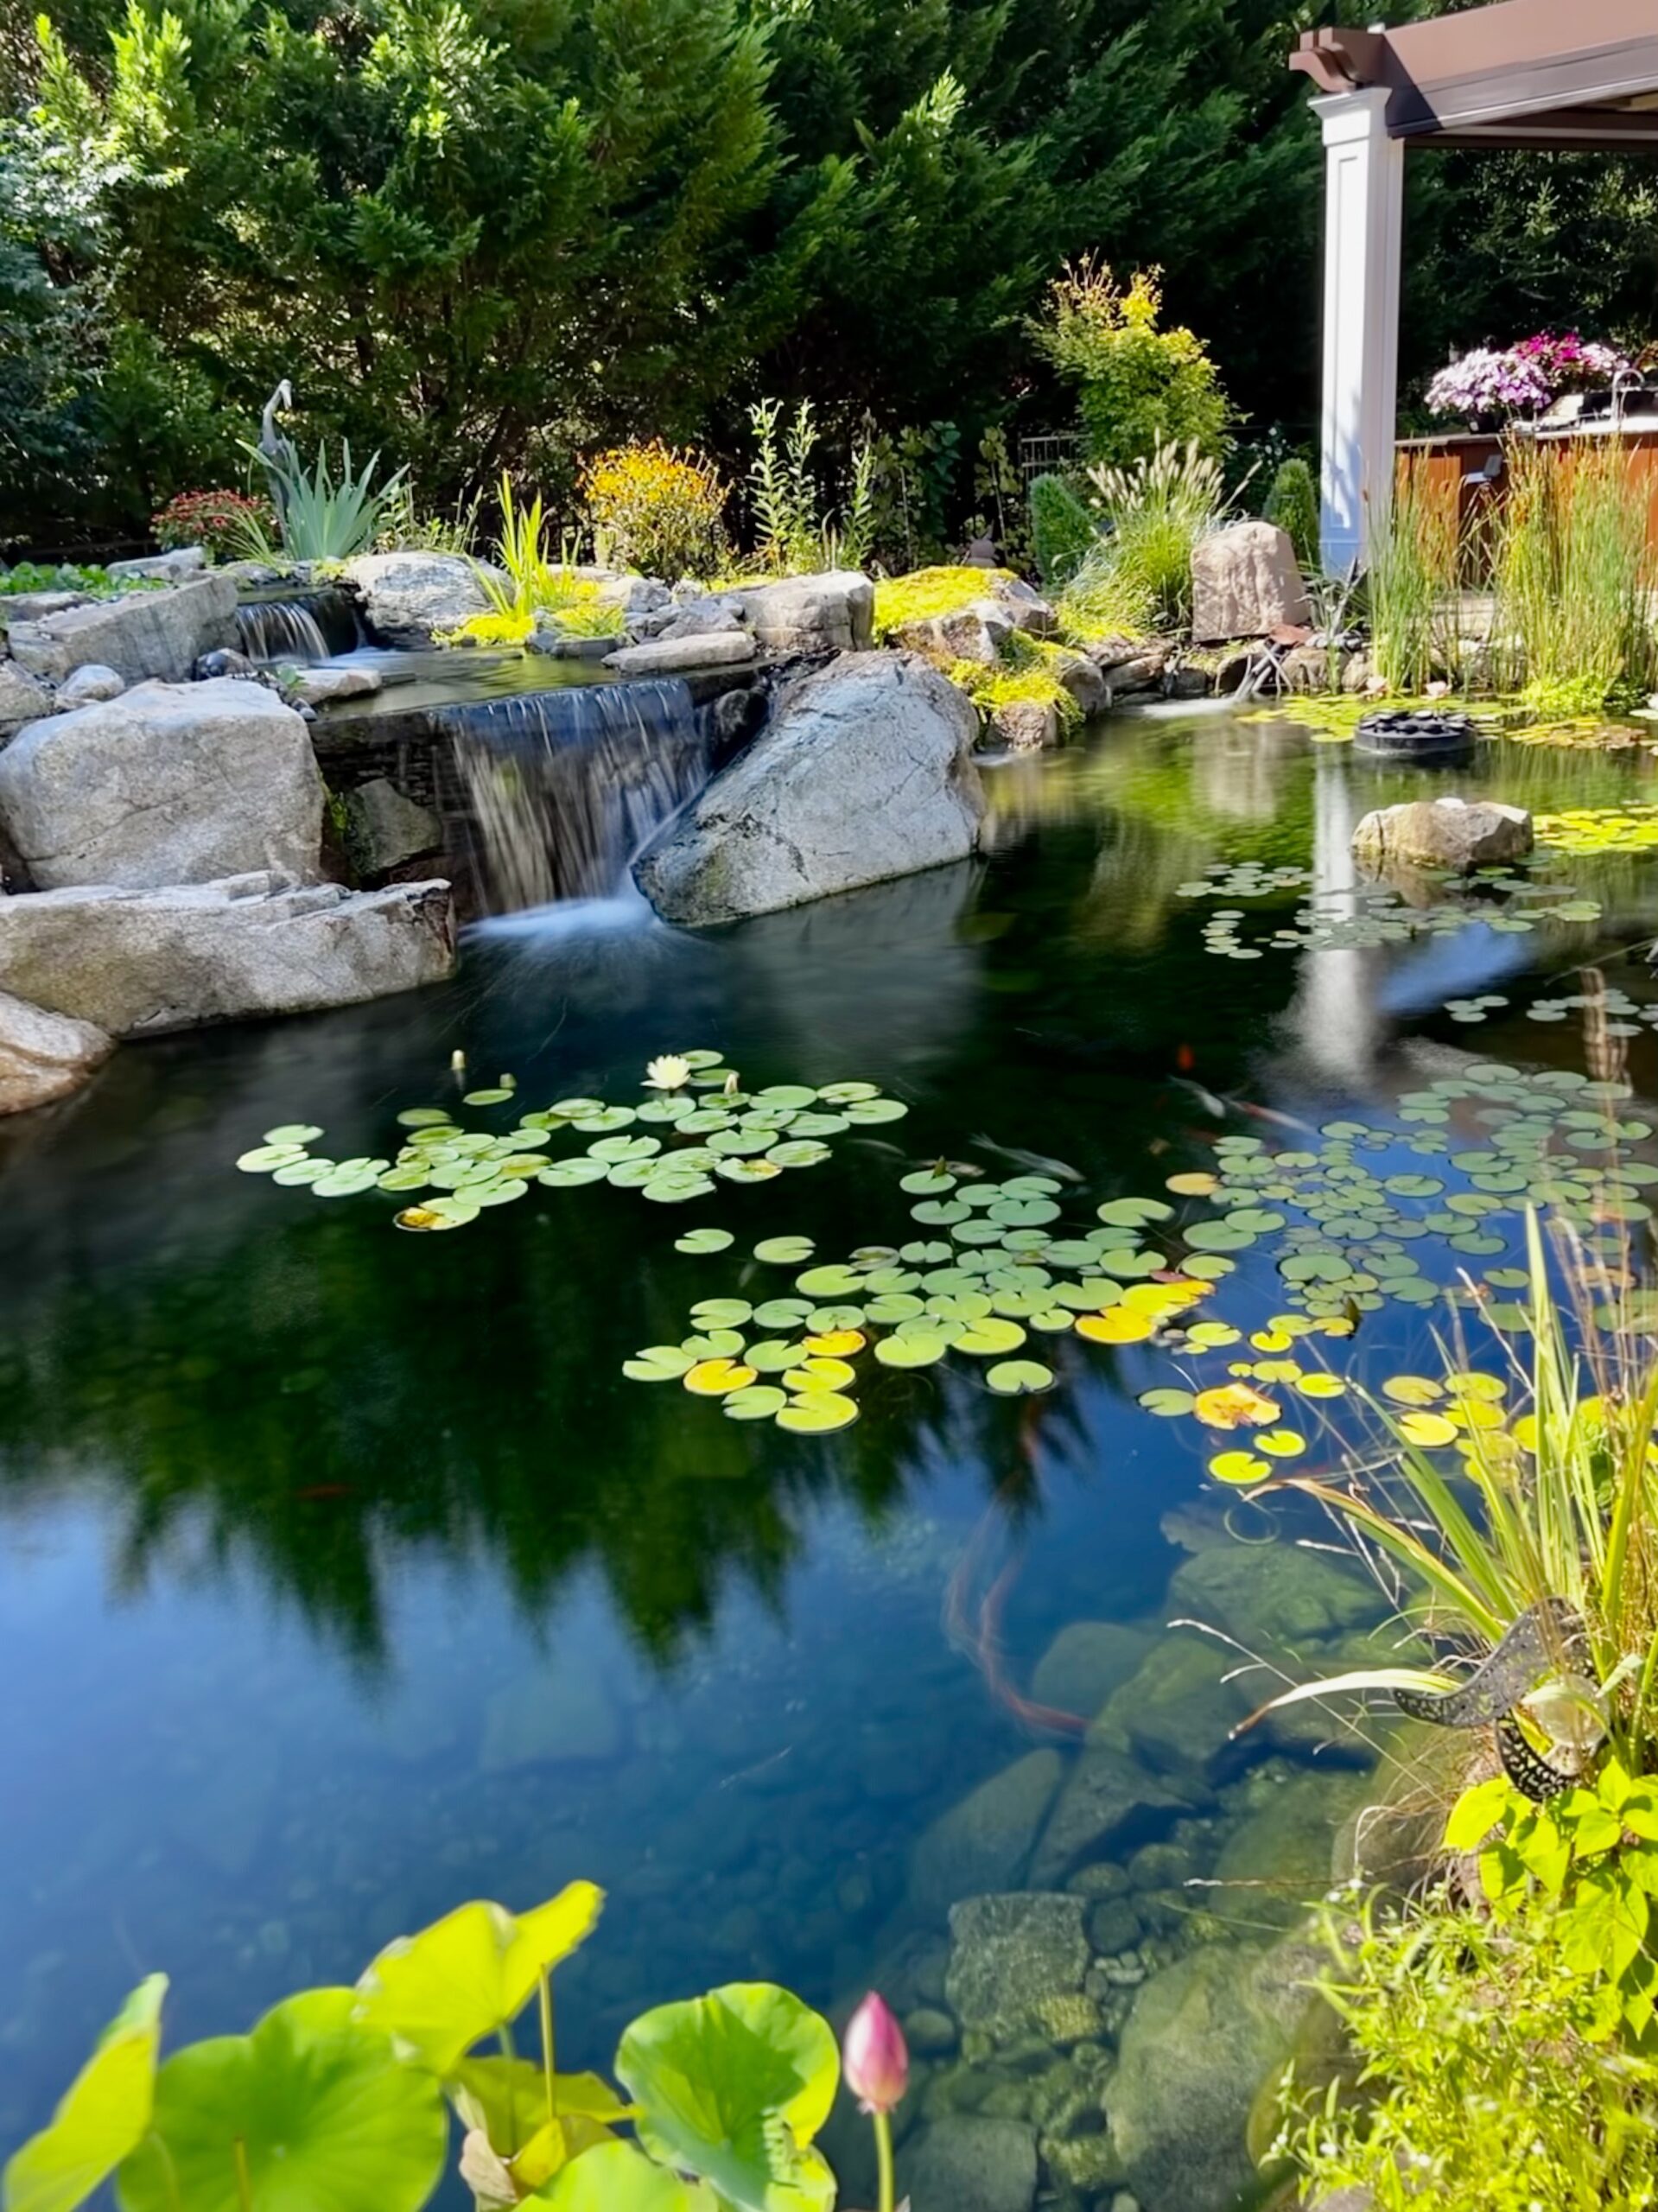 Is a Pondless or an Eco-System Pond a better fit for my space in New Jersey?